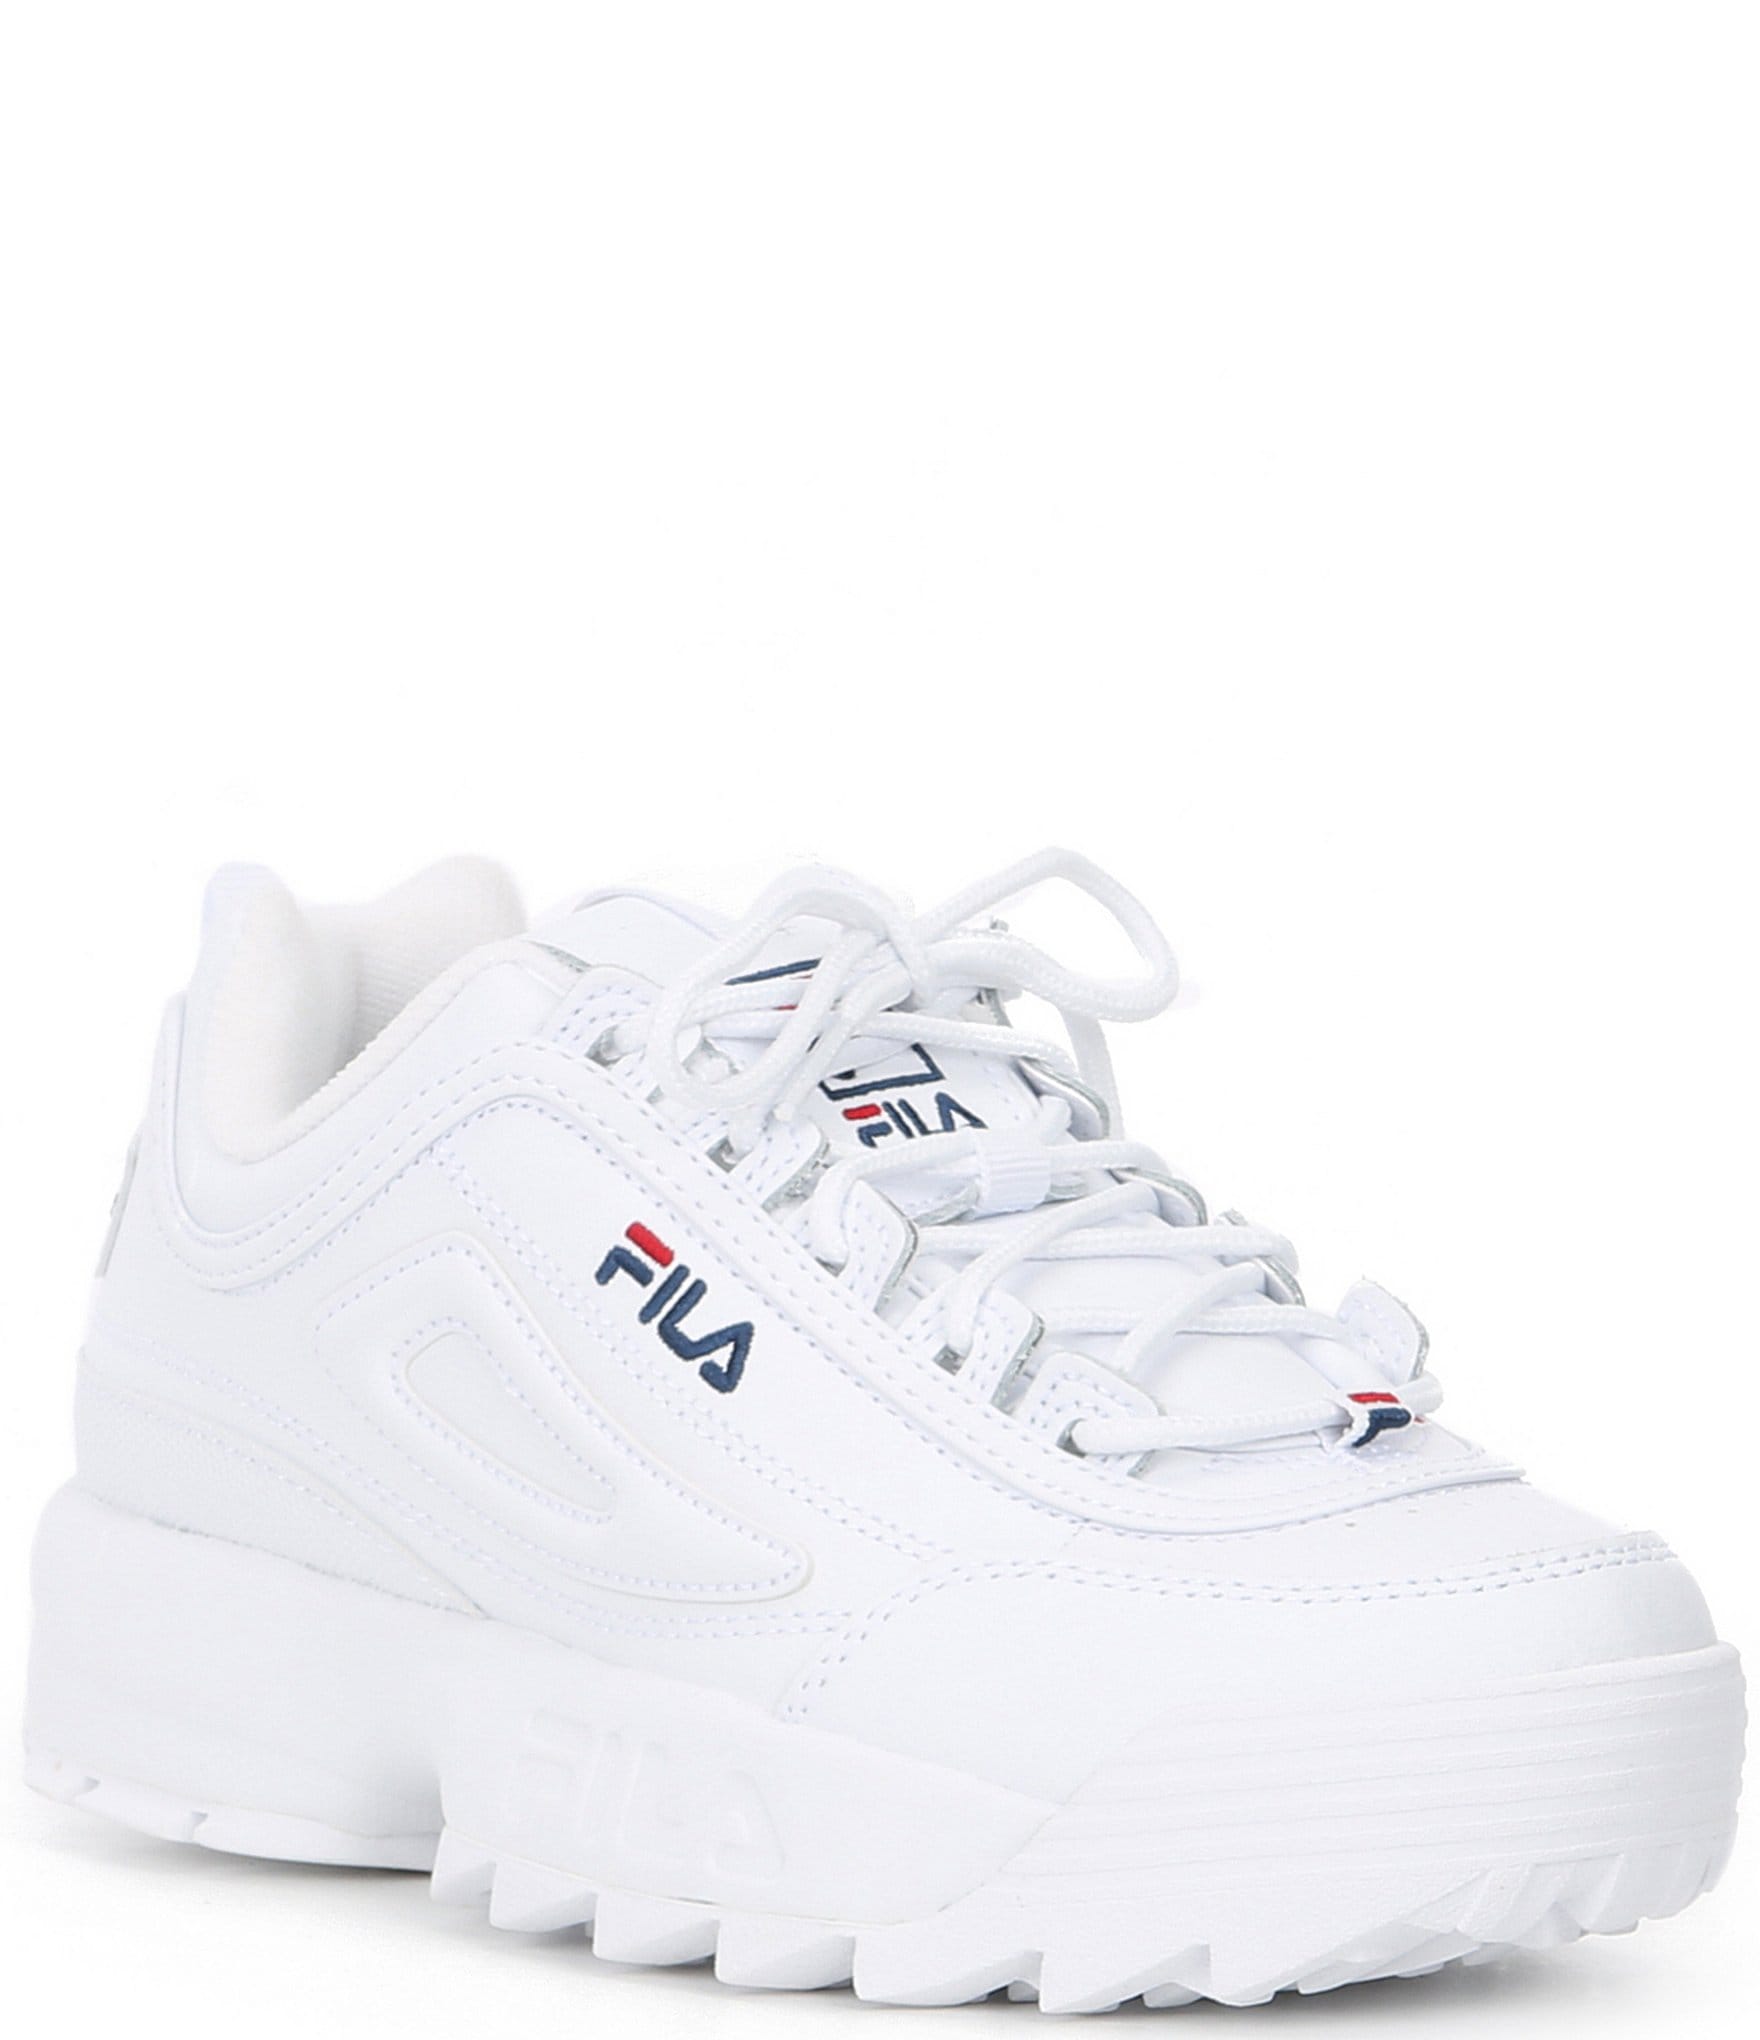 Does Dillards Carry Fila Shoes?